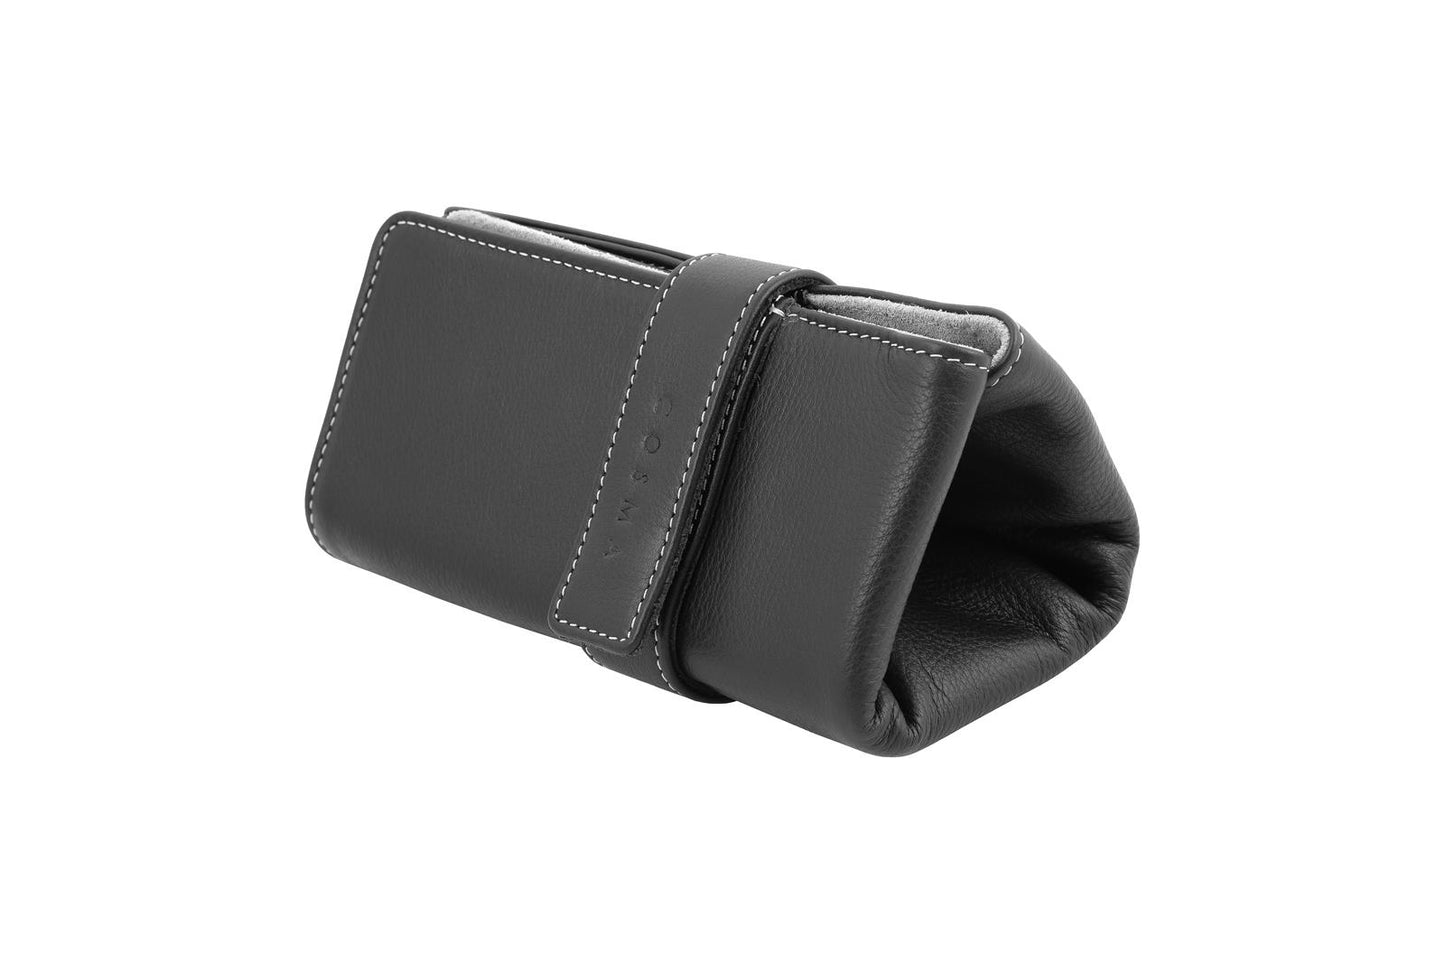 Leather Watch Pouch for 3 watches - Black / Light Gray